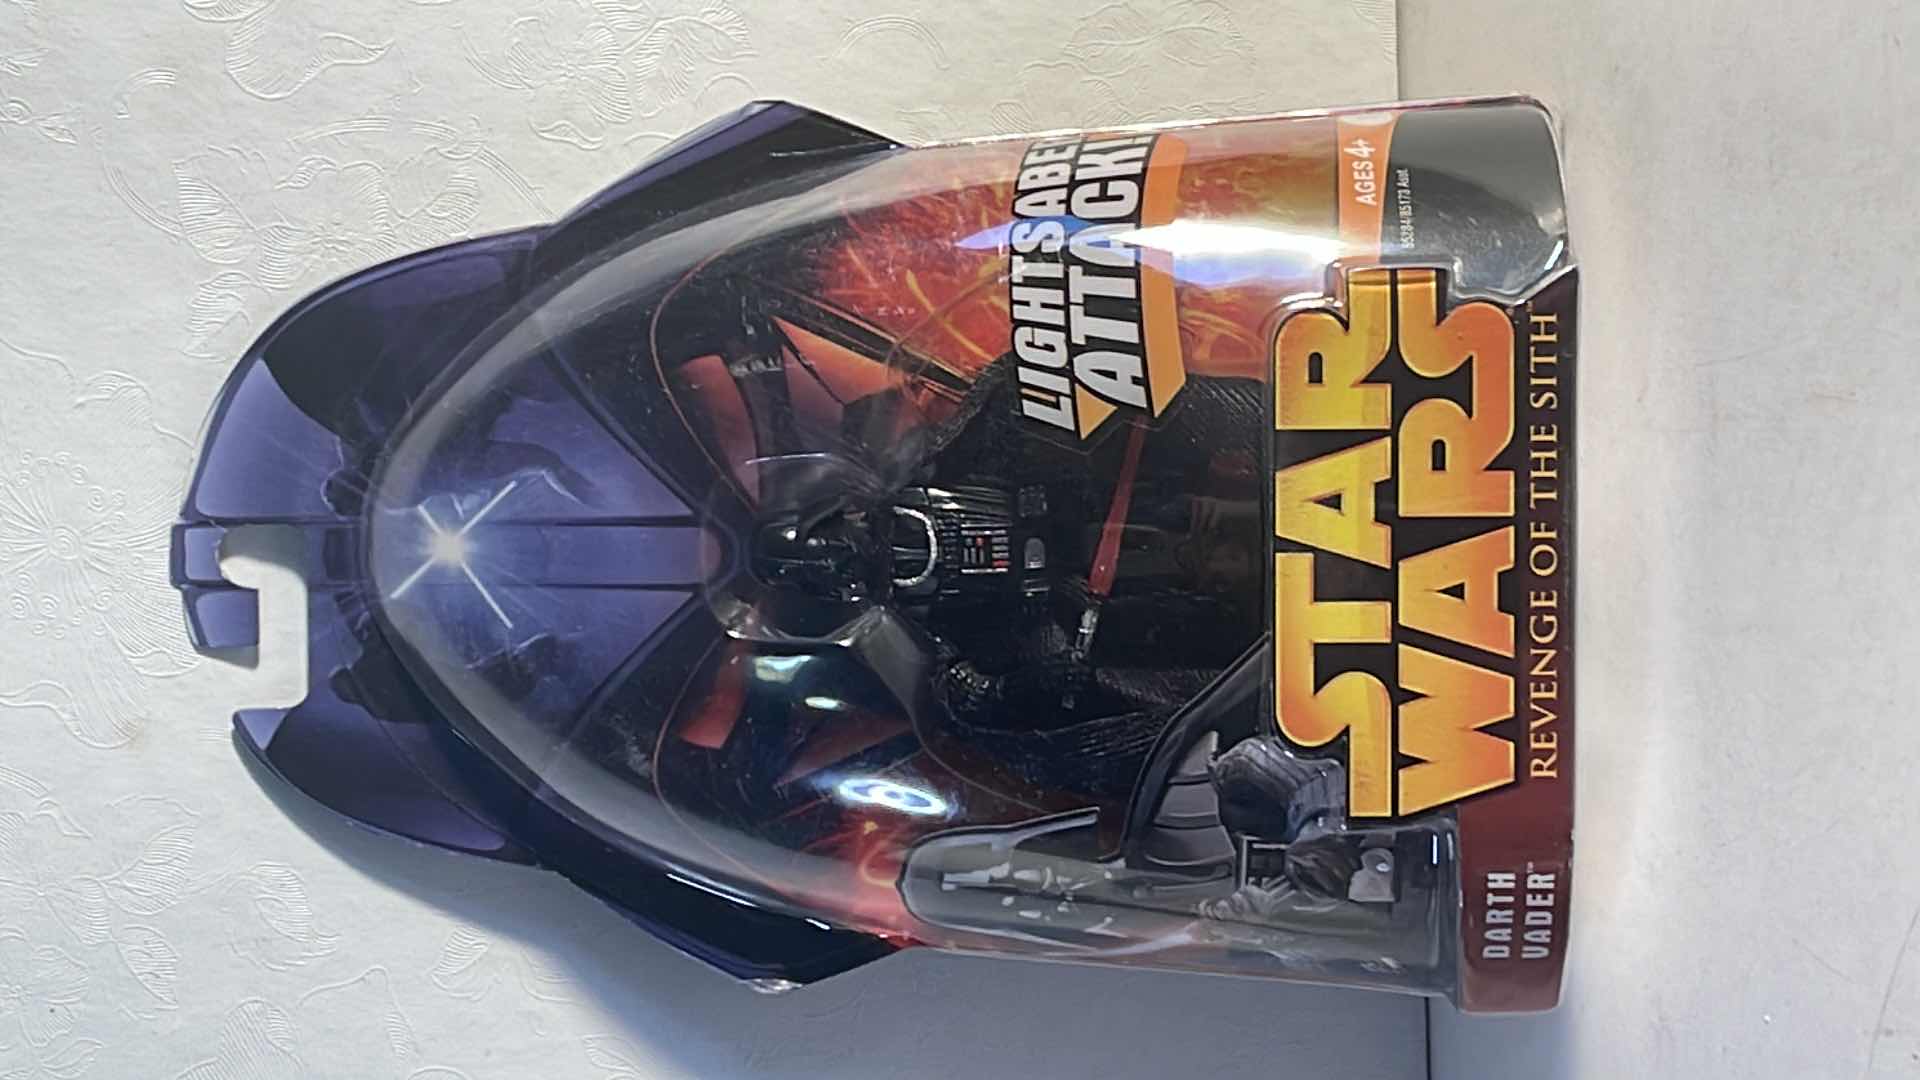 Photo 1 of NIB STAR WARS REVENGE OF THE SITH “DARTH VADER” ACTION FIGURE - RETAIL PRICE $12.00